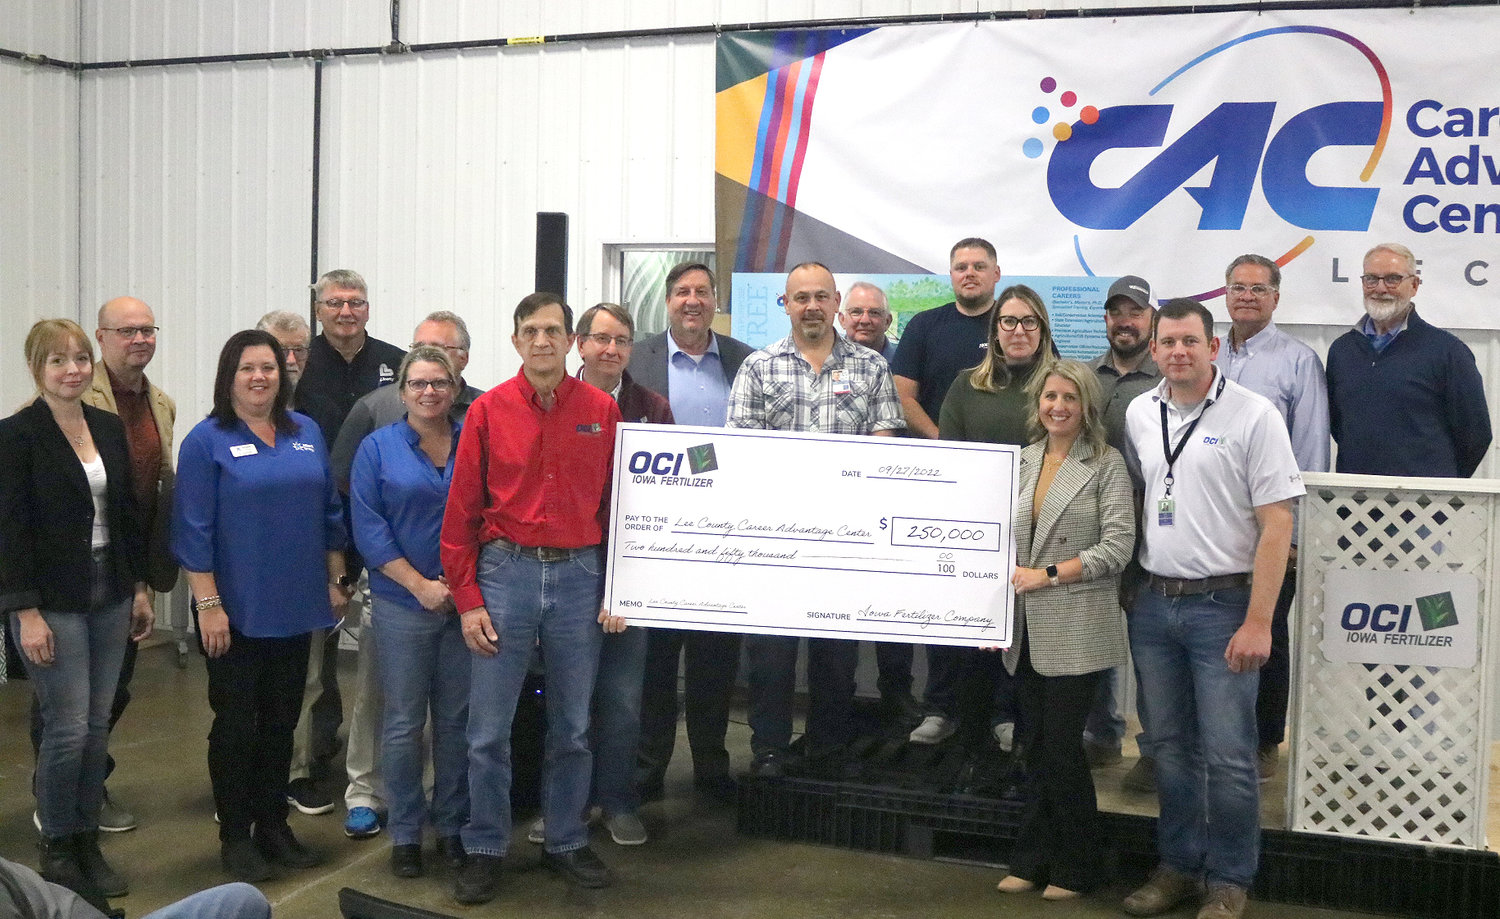 Members of the LCEDG Board, local officials and representatives of OCI Iowa Fertilizer pose with a check for $250,000 to the Lee County Career Advancement Center Tuesday